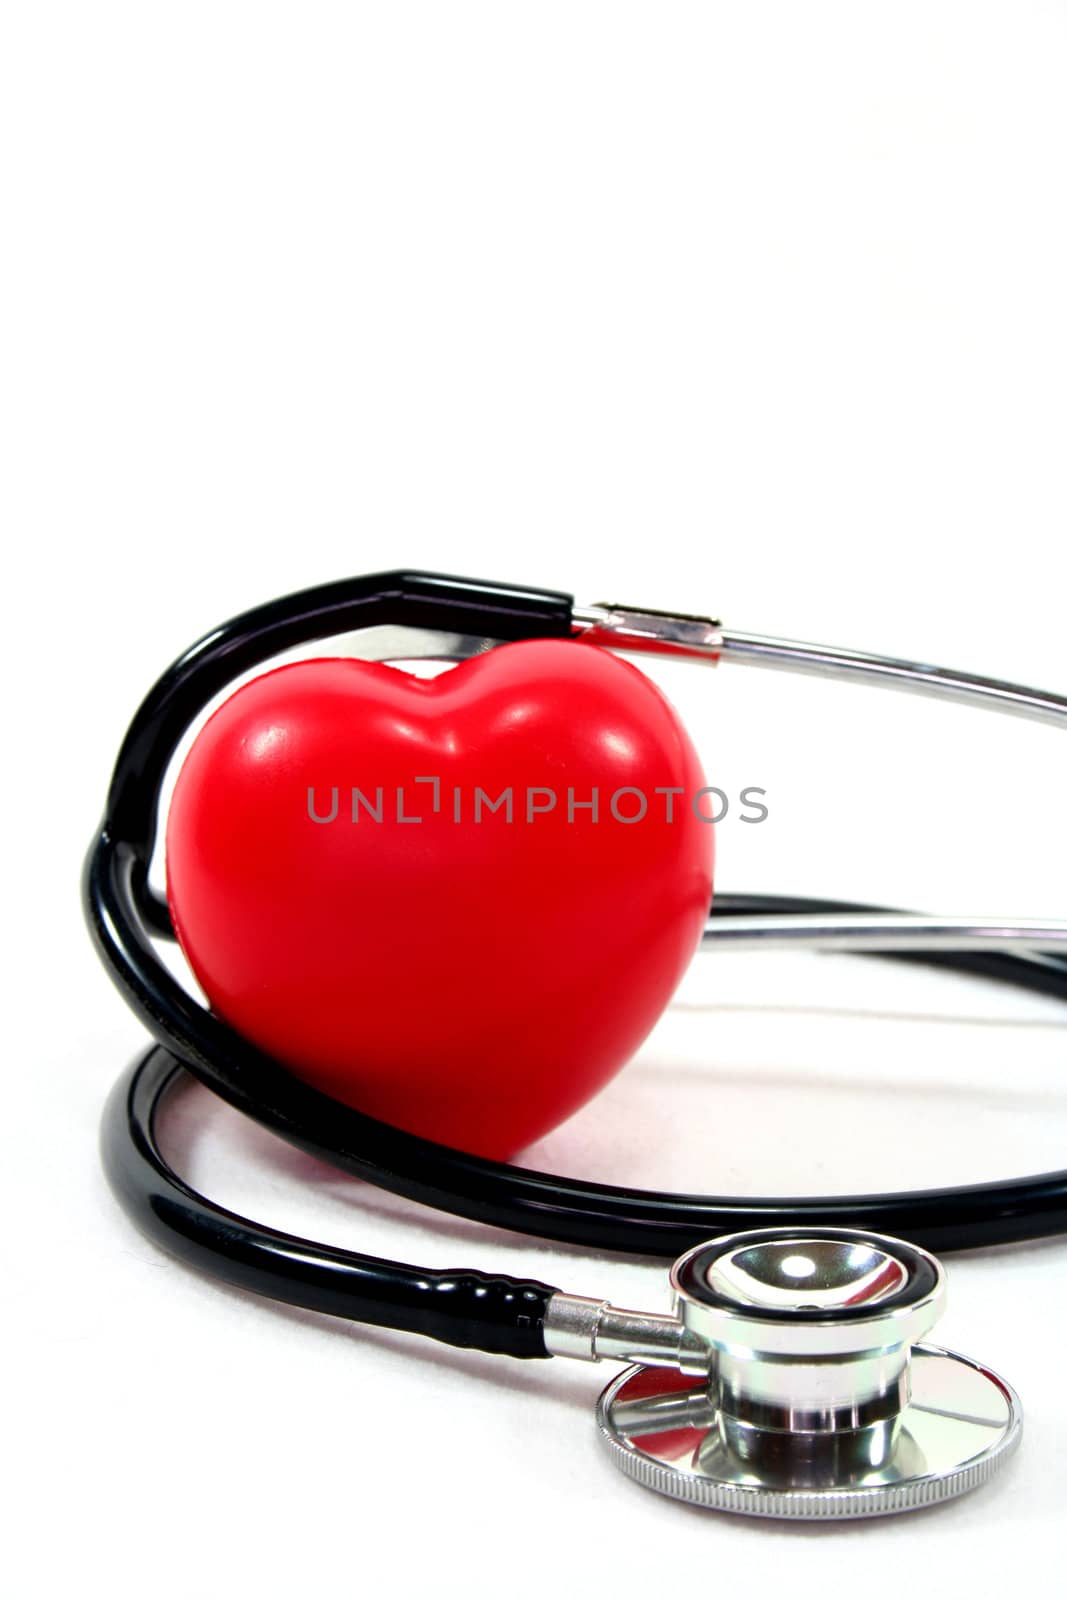 Stethoscope with heart by silencefoto